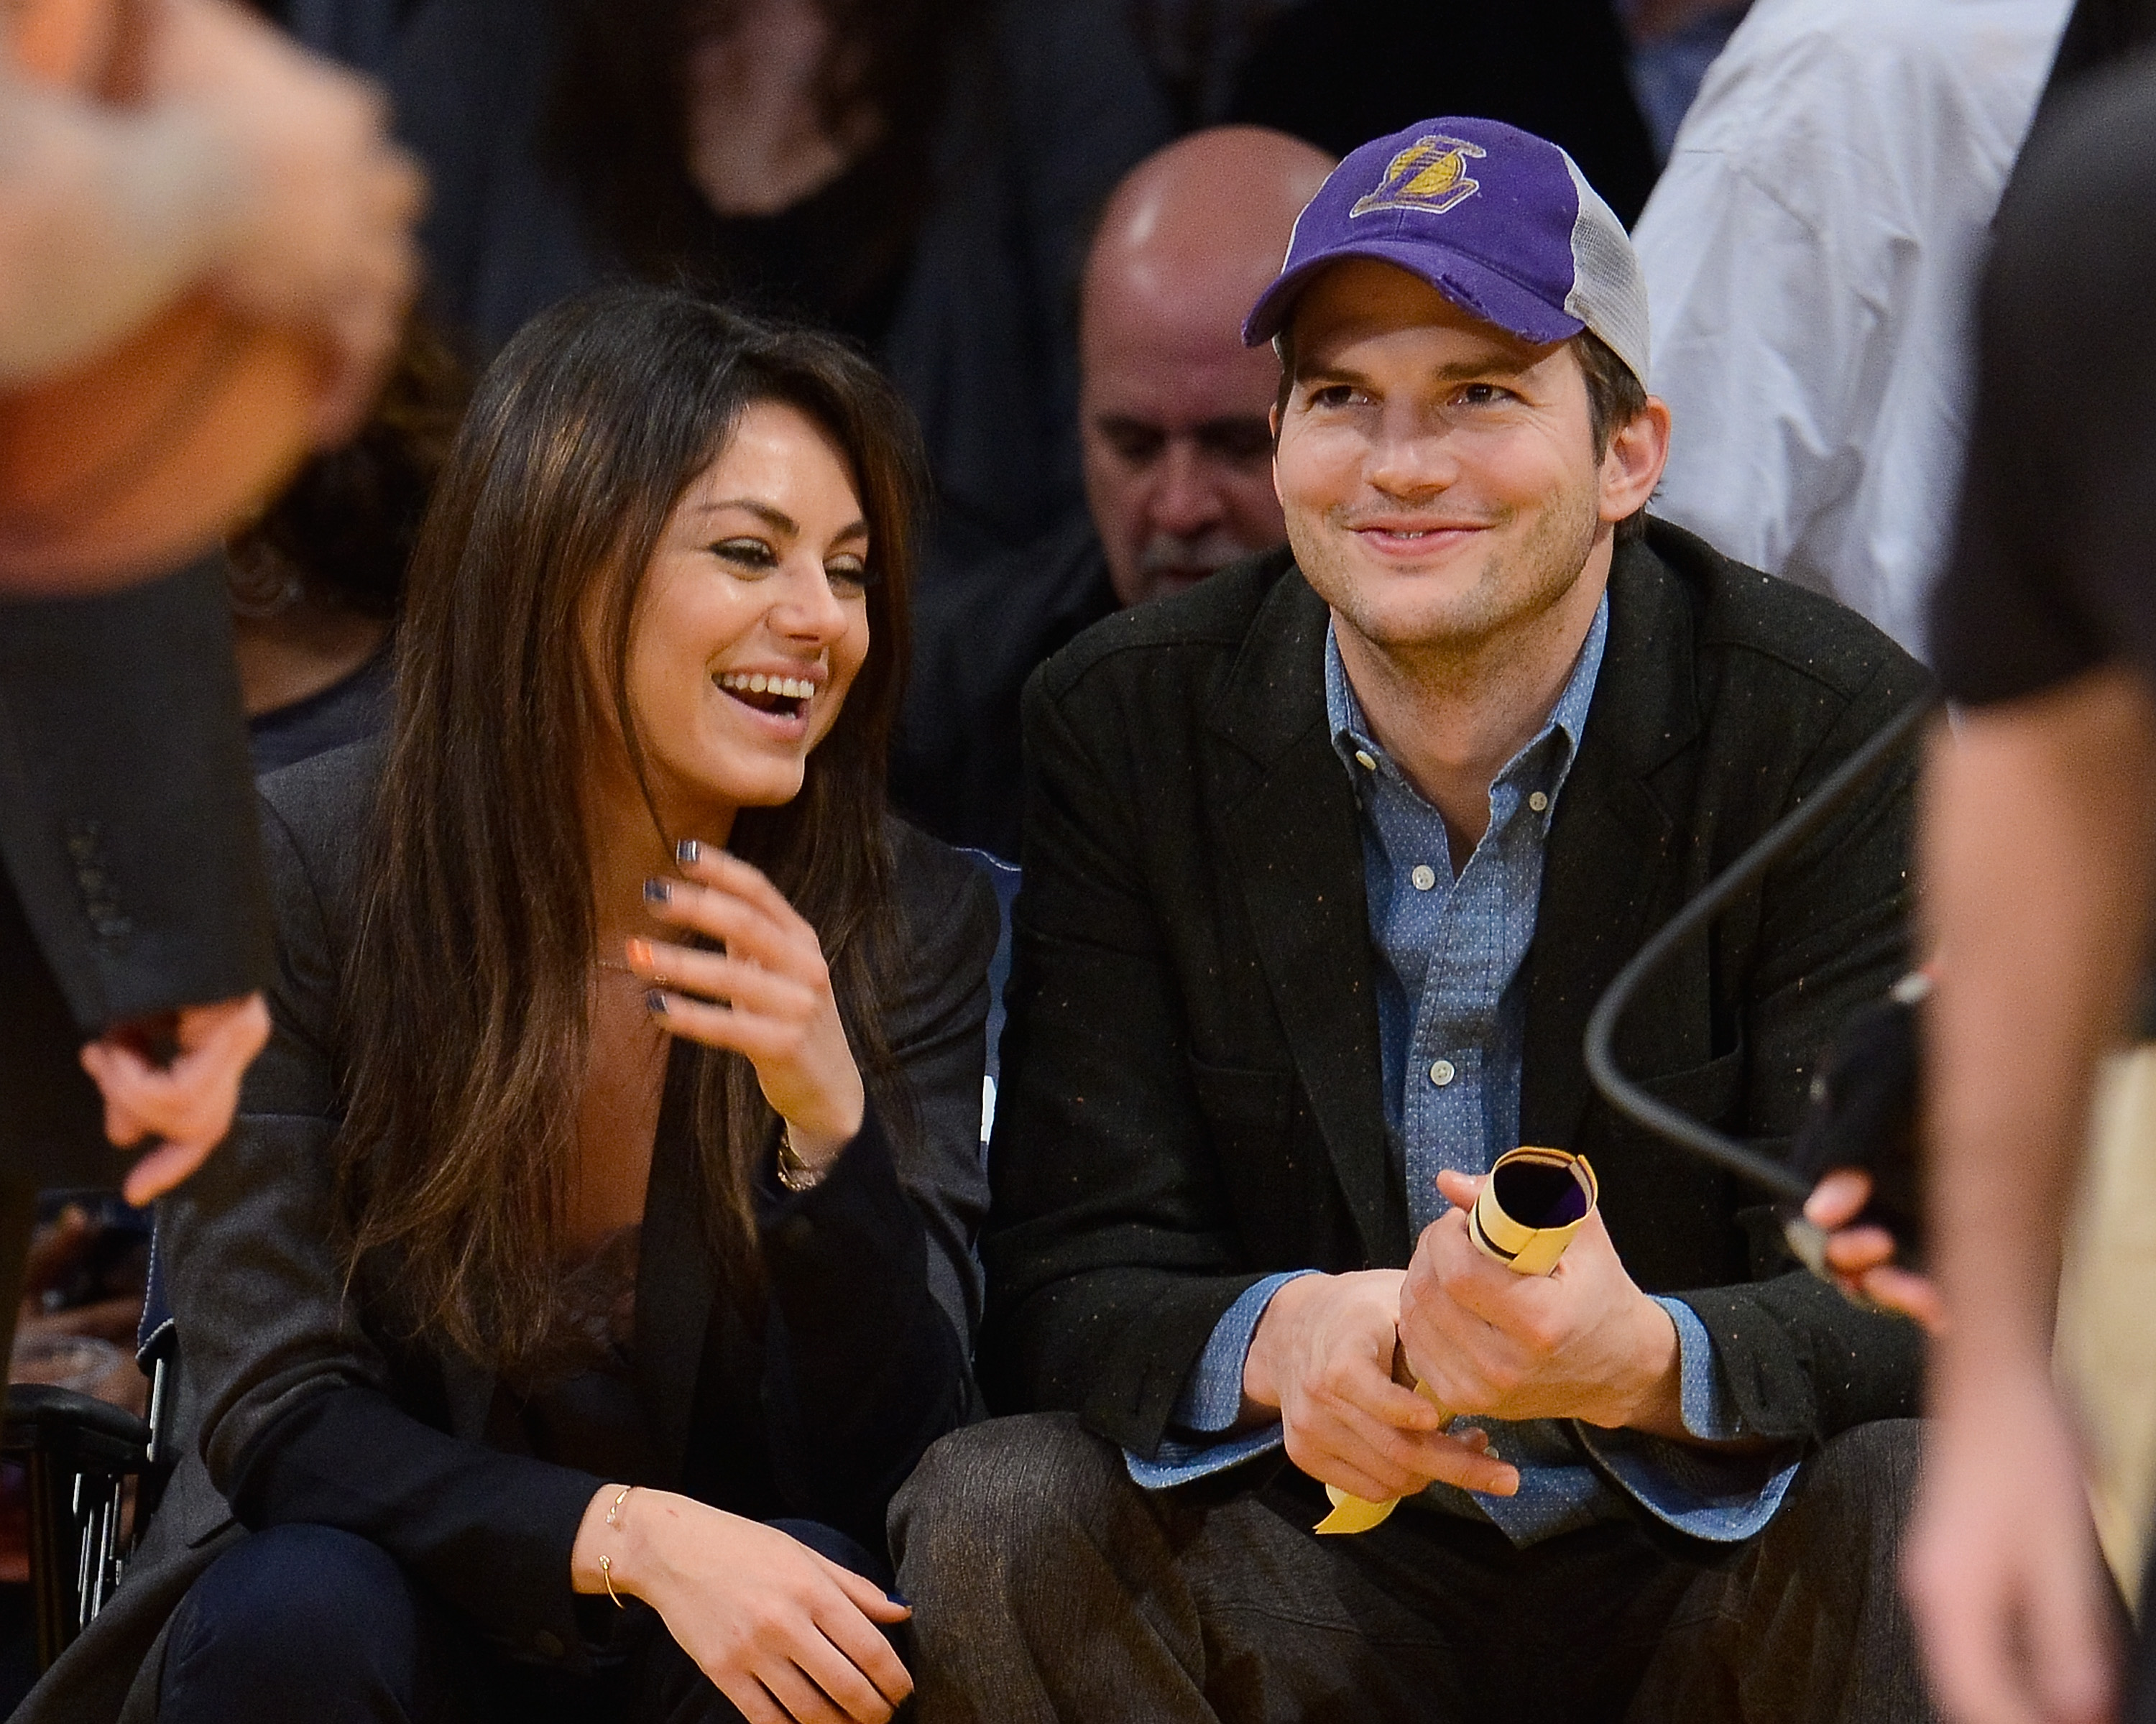 Ashton Kutcher (R) and Mila Kunis attend a basketball game at Staples Center on Jan. 3, 2014 in Los Angeles, California. (Noel Vasquez—Getty Images)